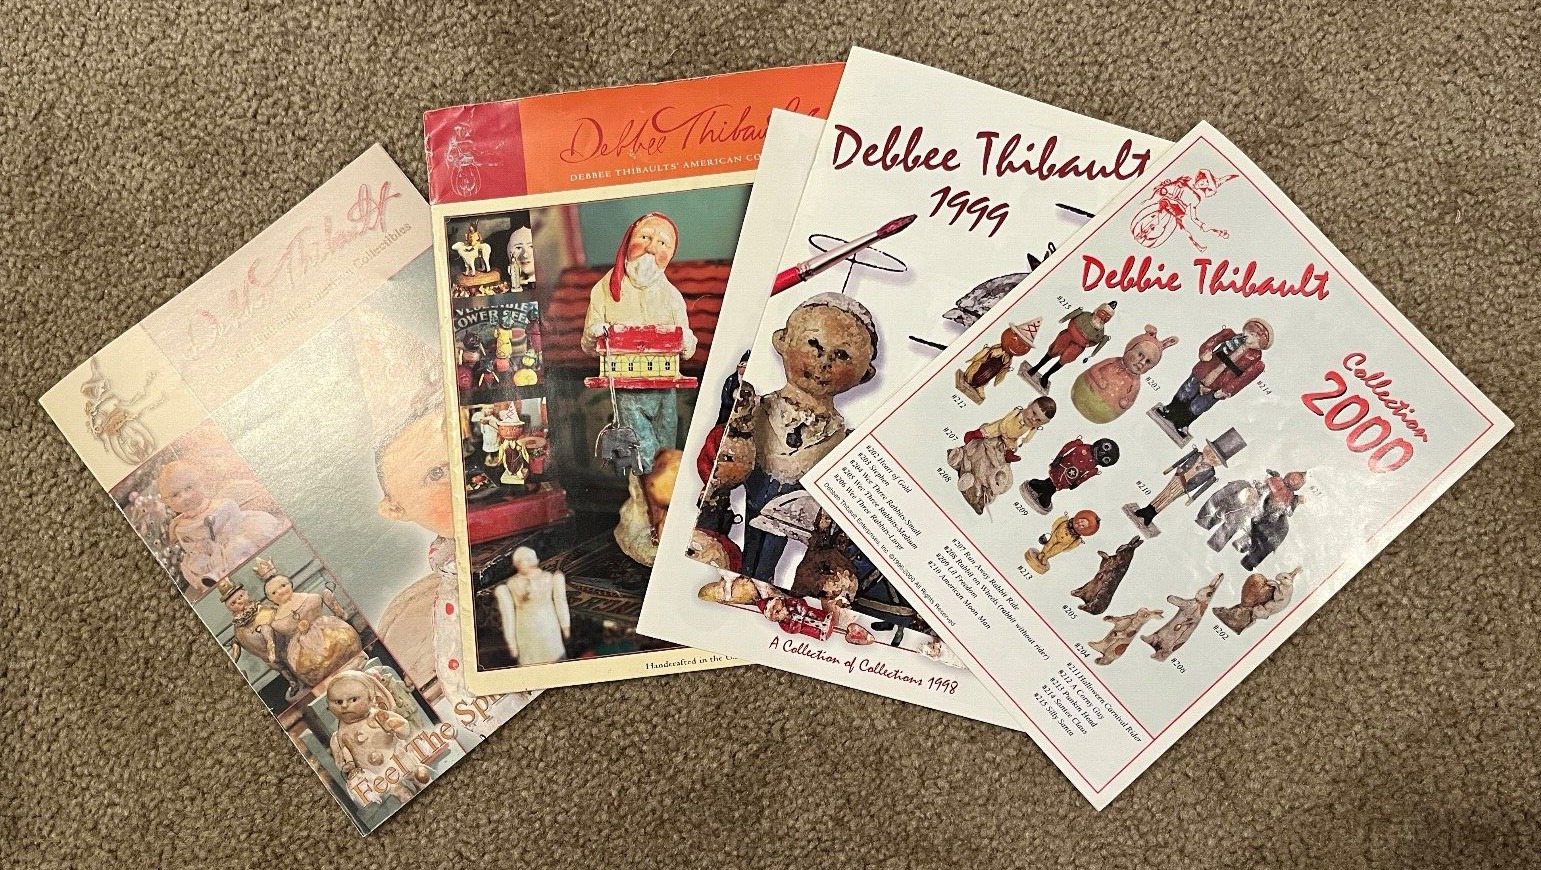 Debbee Thibault Catalogs (5) - Includes 1998, 1999, and 2000 and 2 Others